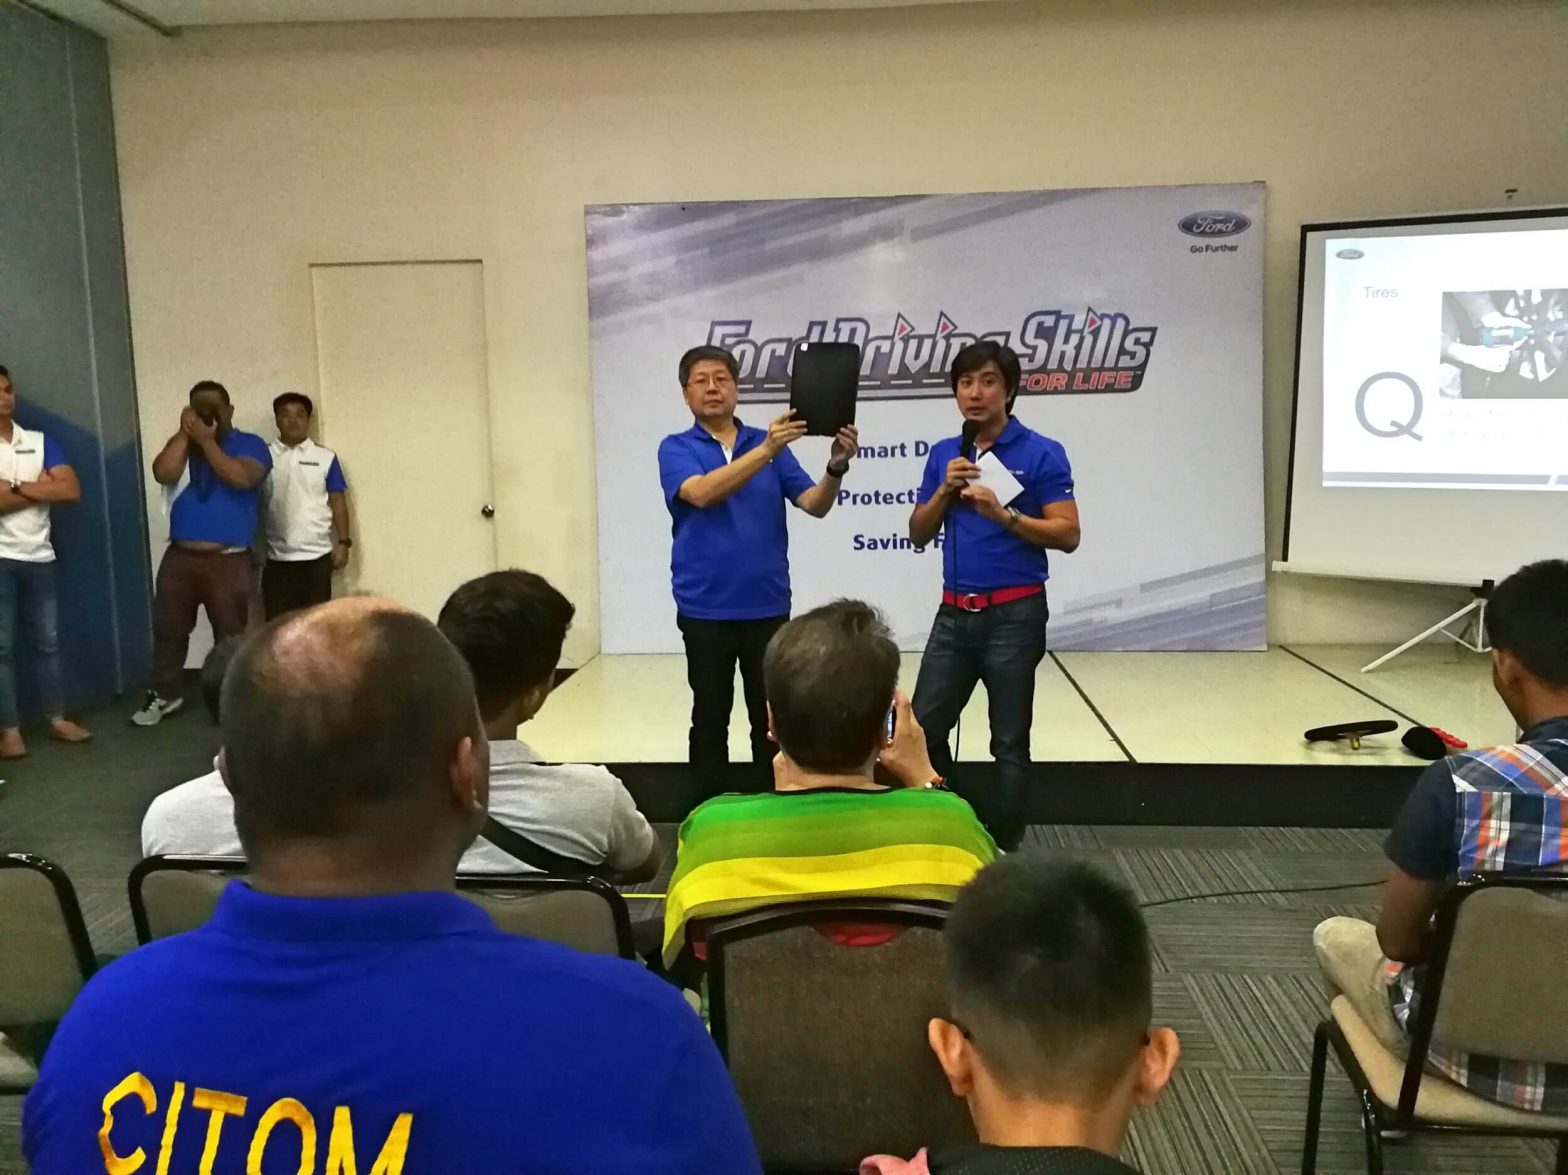 Ford Philippines trains Cebu drivers on safe, smart driving